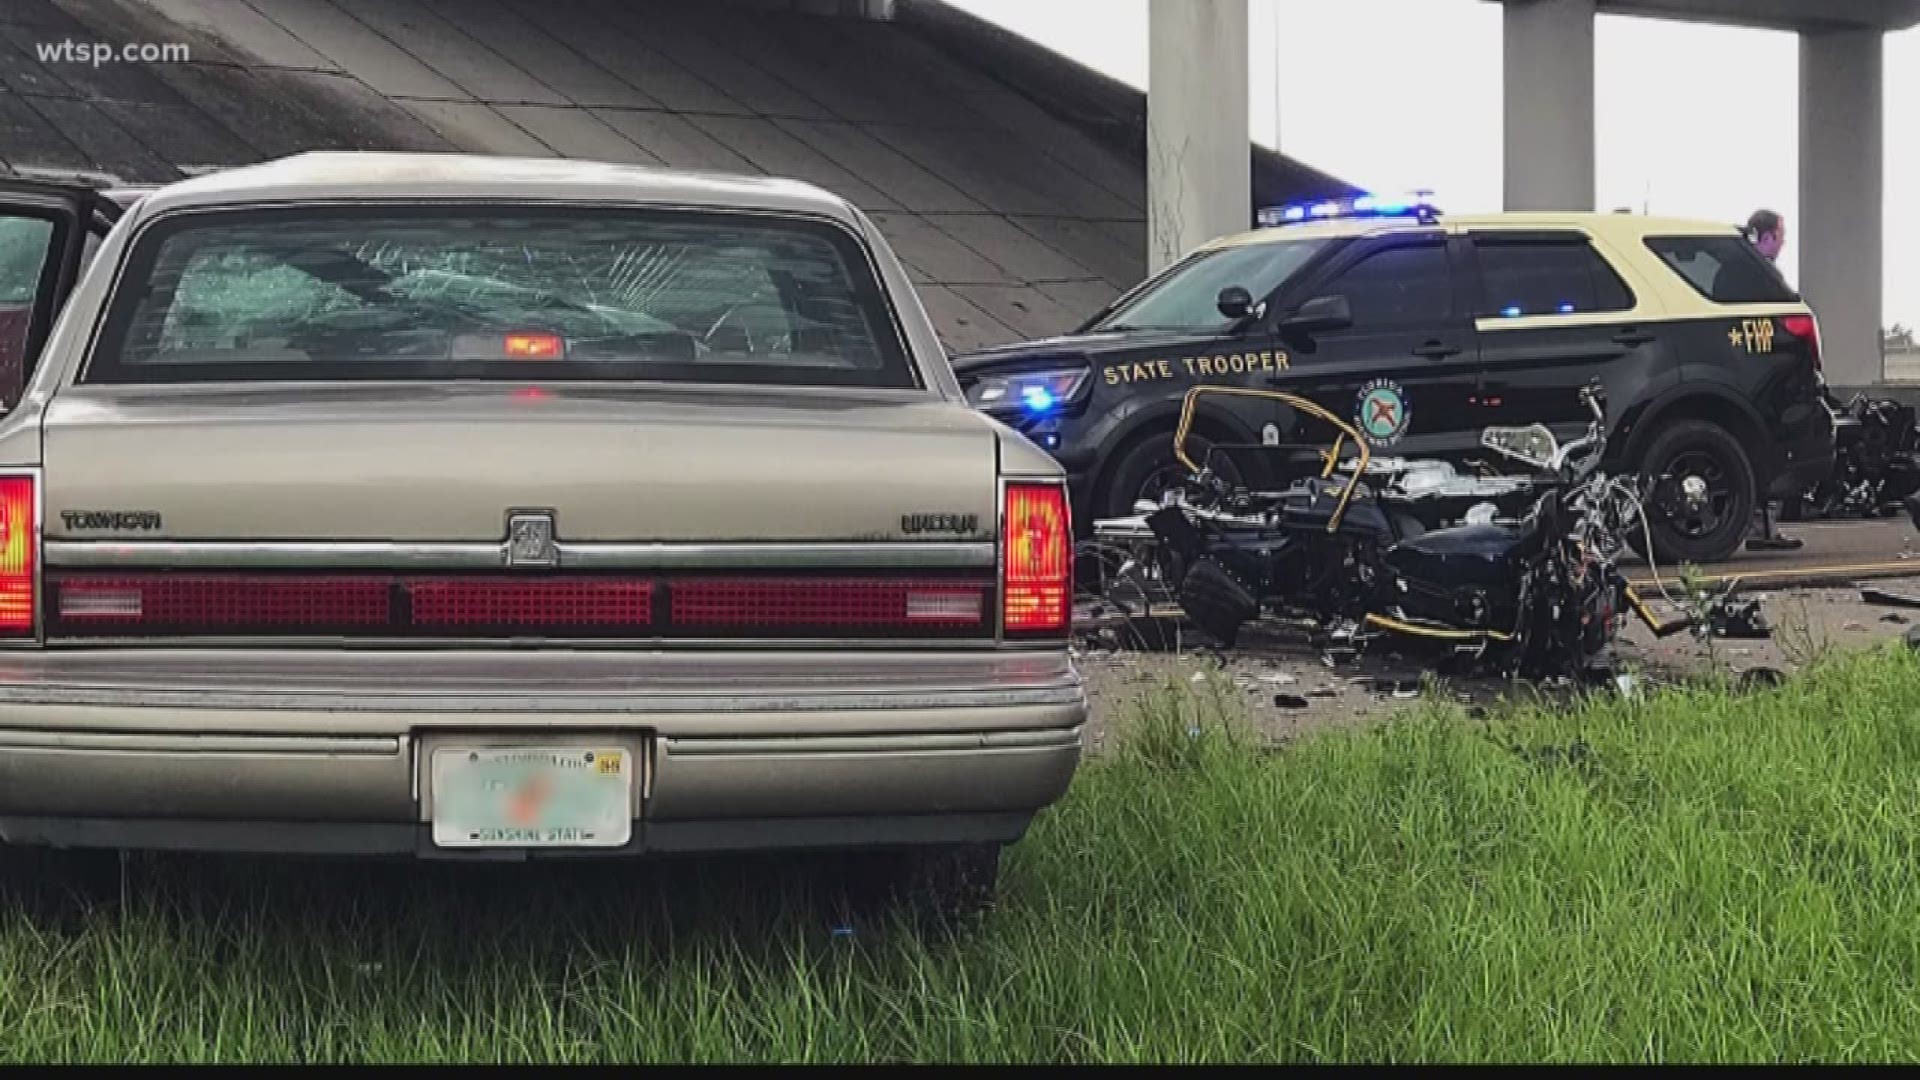 A wrong-way crash led to a motorcyclist's death Wednesday on Interstate 75 near the Hillsborough/Pasco County line, the Florida Highway Patrol said.

Troopers said about 3:30 p.m., a 1994 Lincoln Town Car was headed south in the northbound lanes of the interstate after making a U-turn from the I-275 entrance ramp.

The Lincoln hit a 2012 Harley Davidson motorcycle head-on near County Line Road, troopers said.